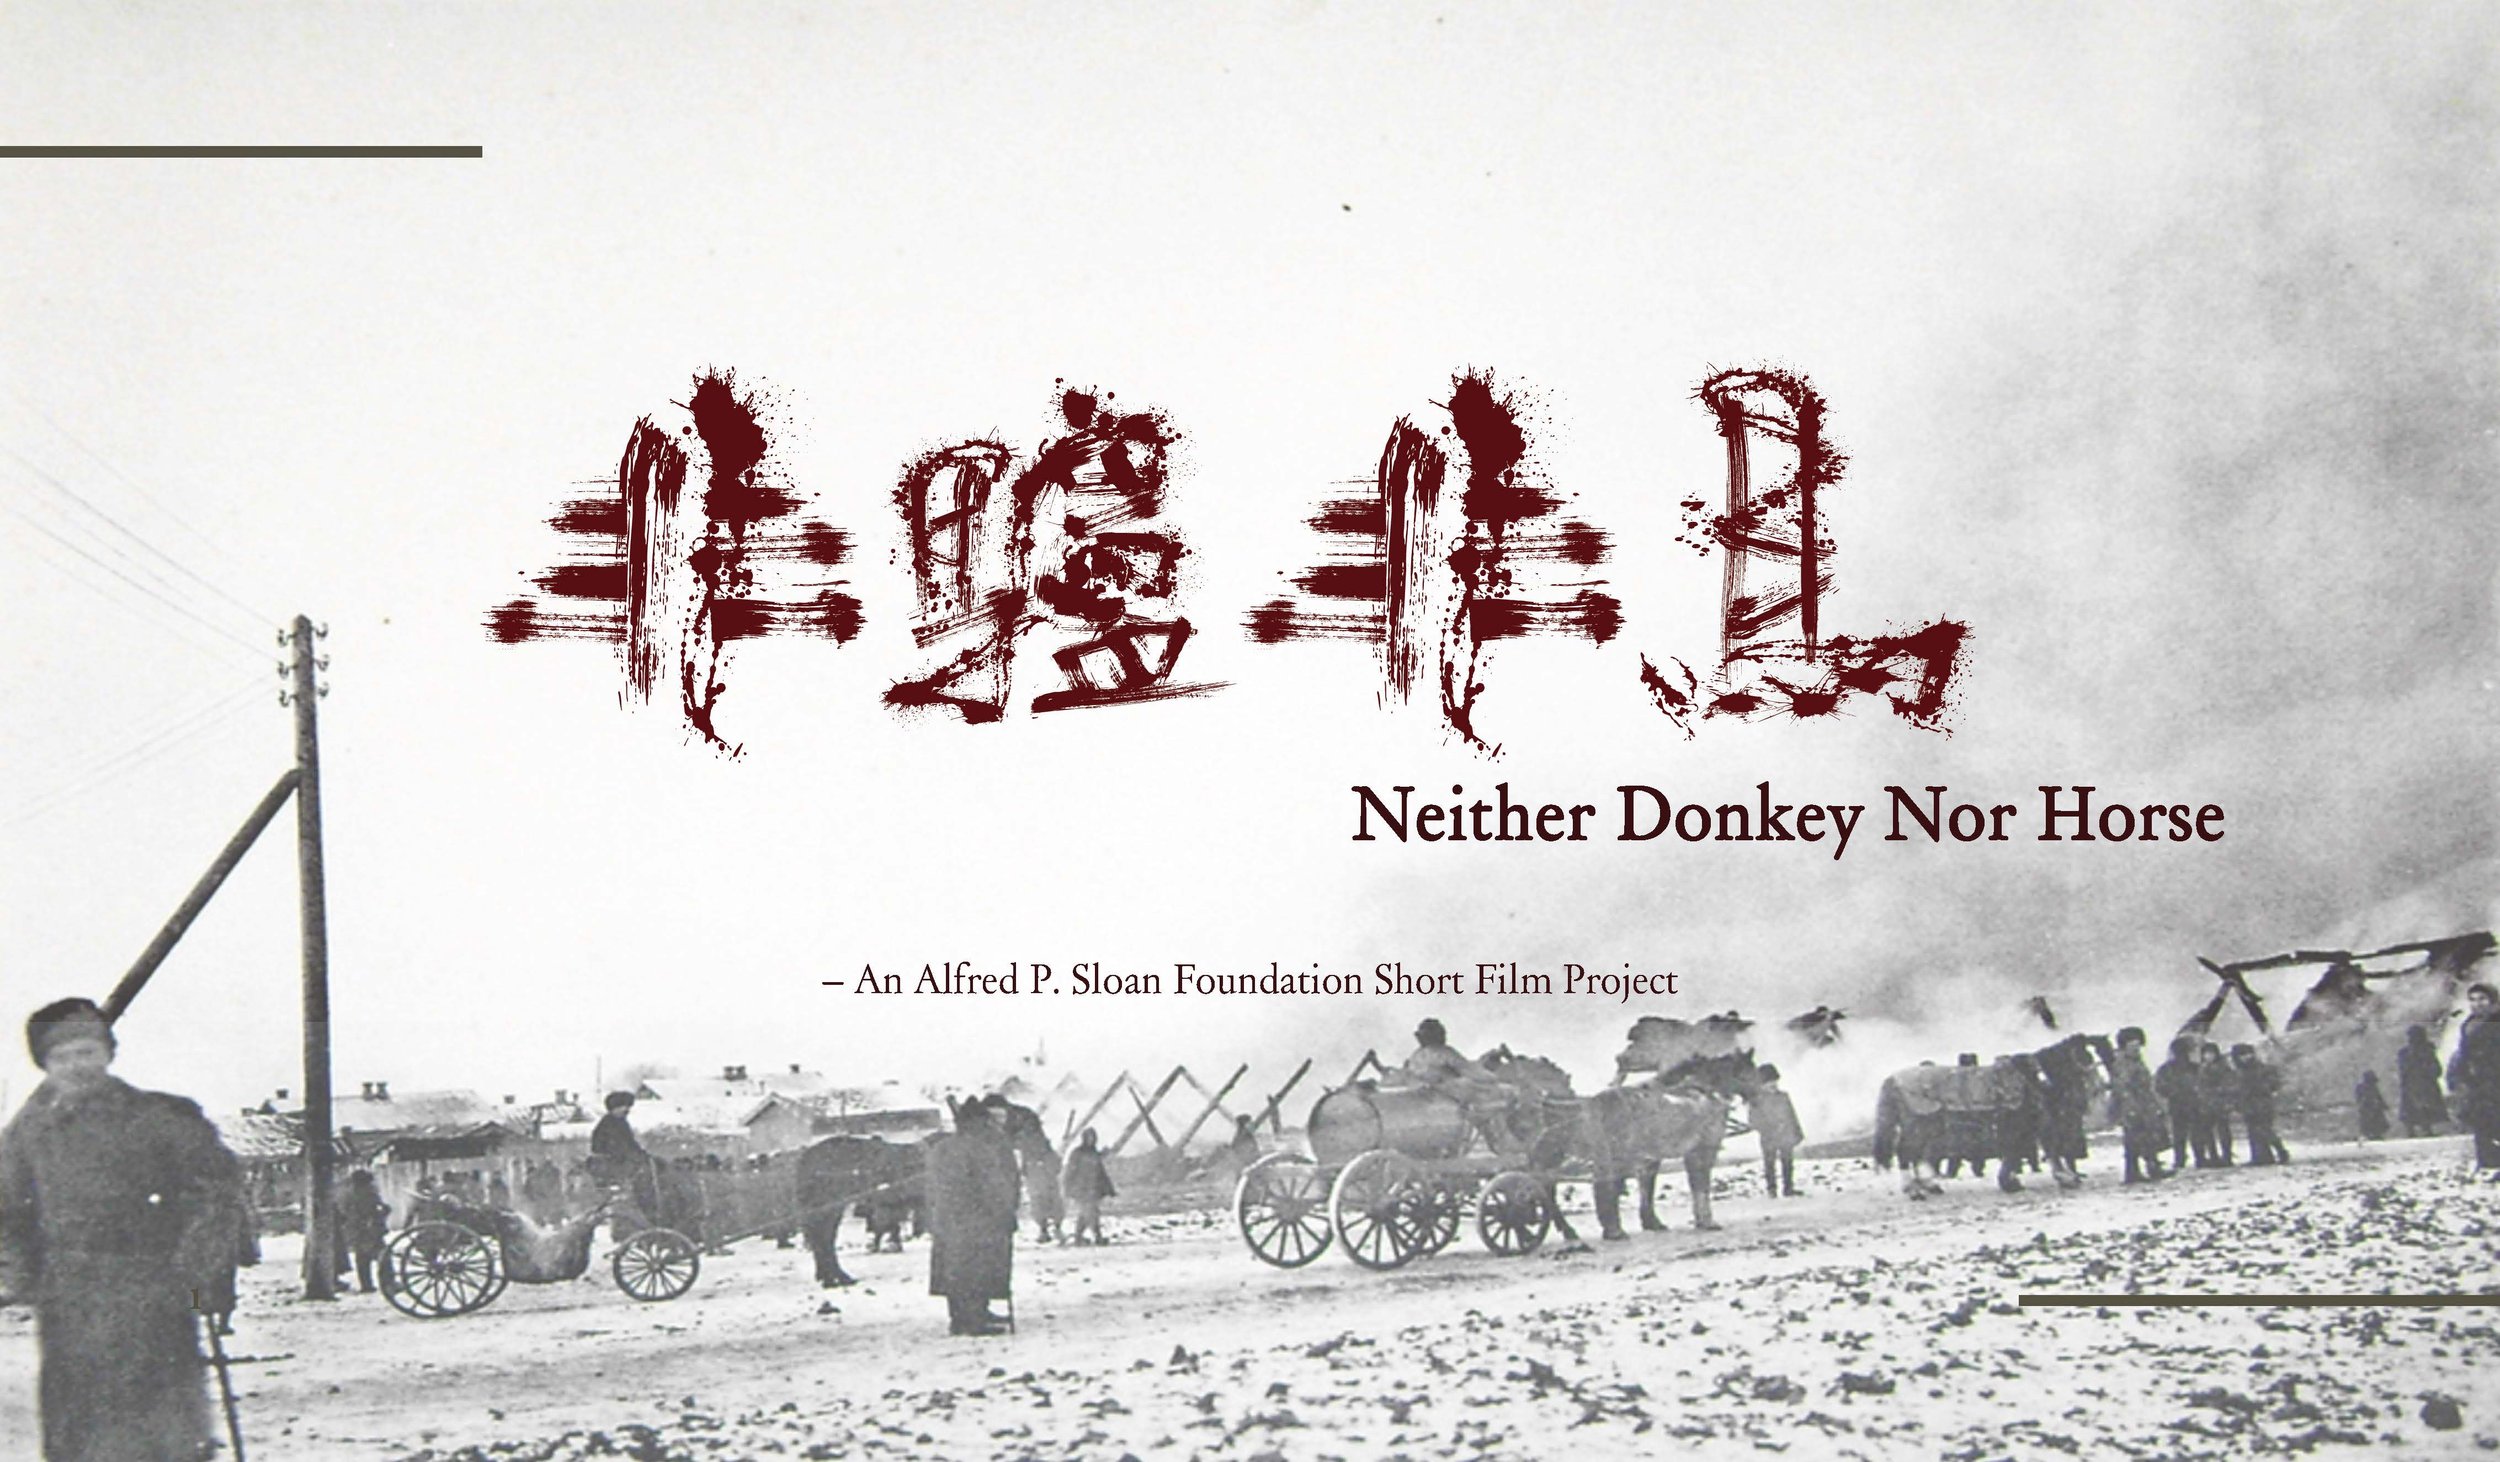 Neither Donkey Nor Horse Pitch Deck 0502 1.jpg